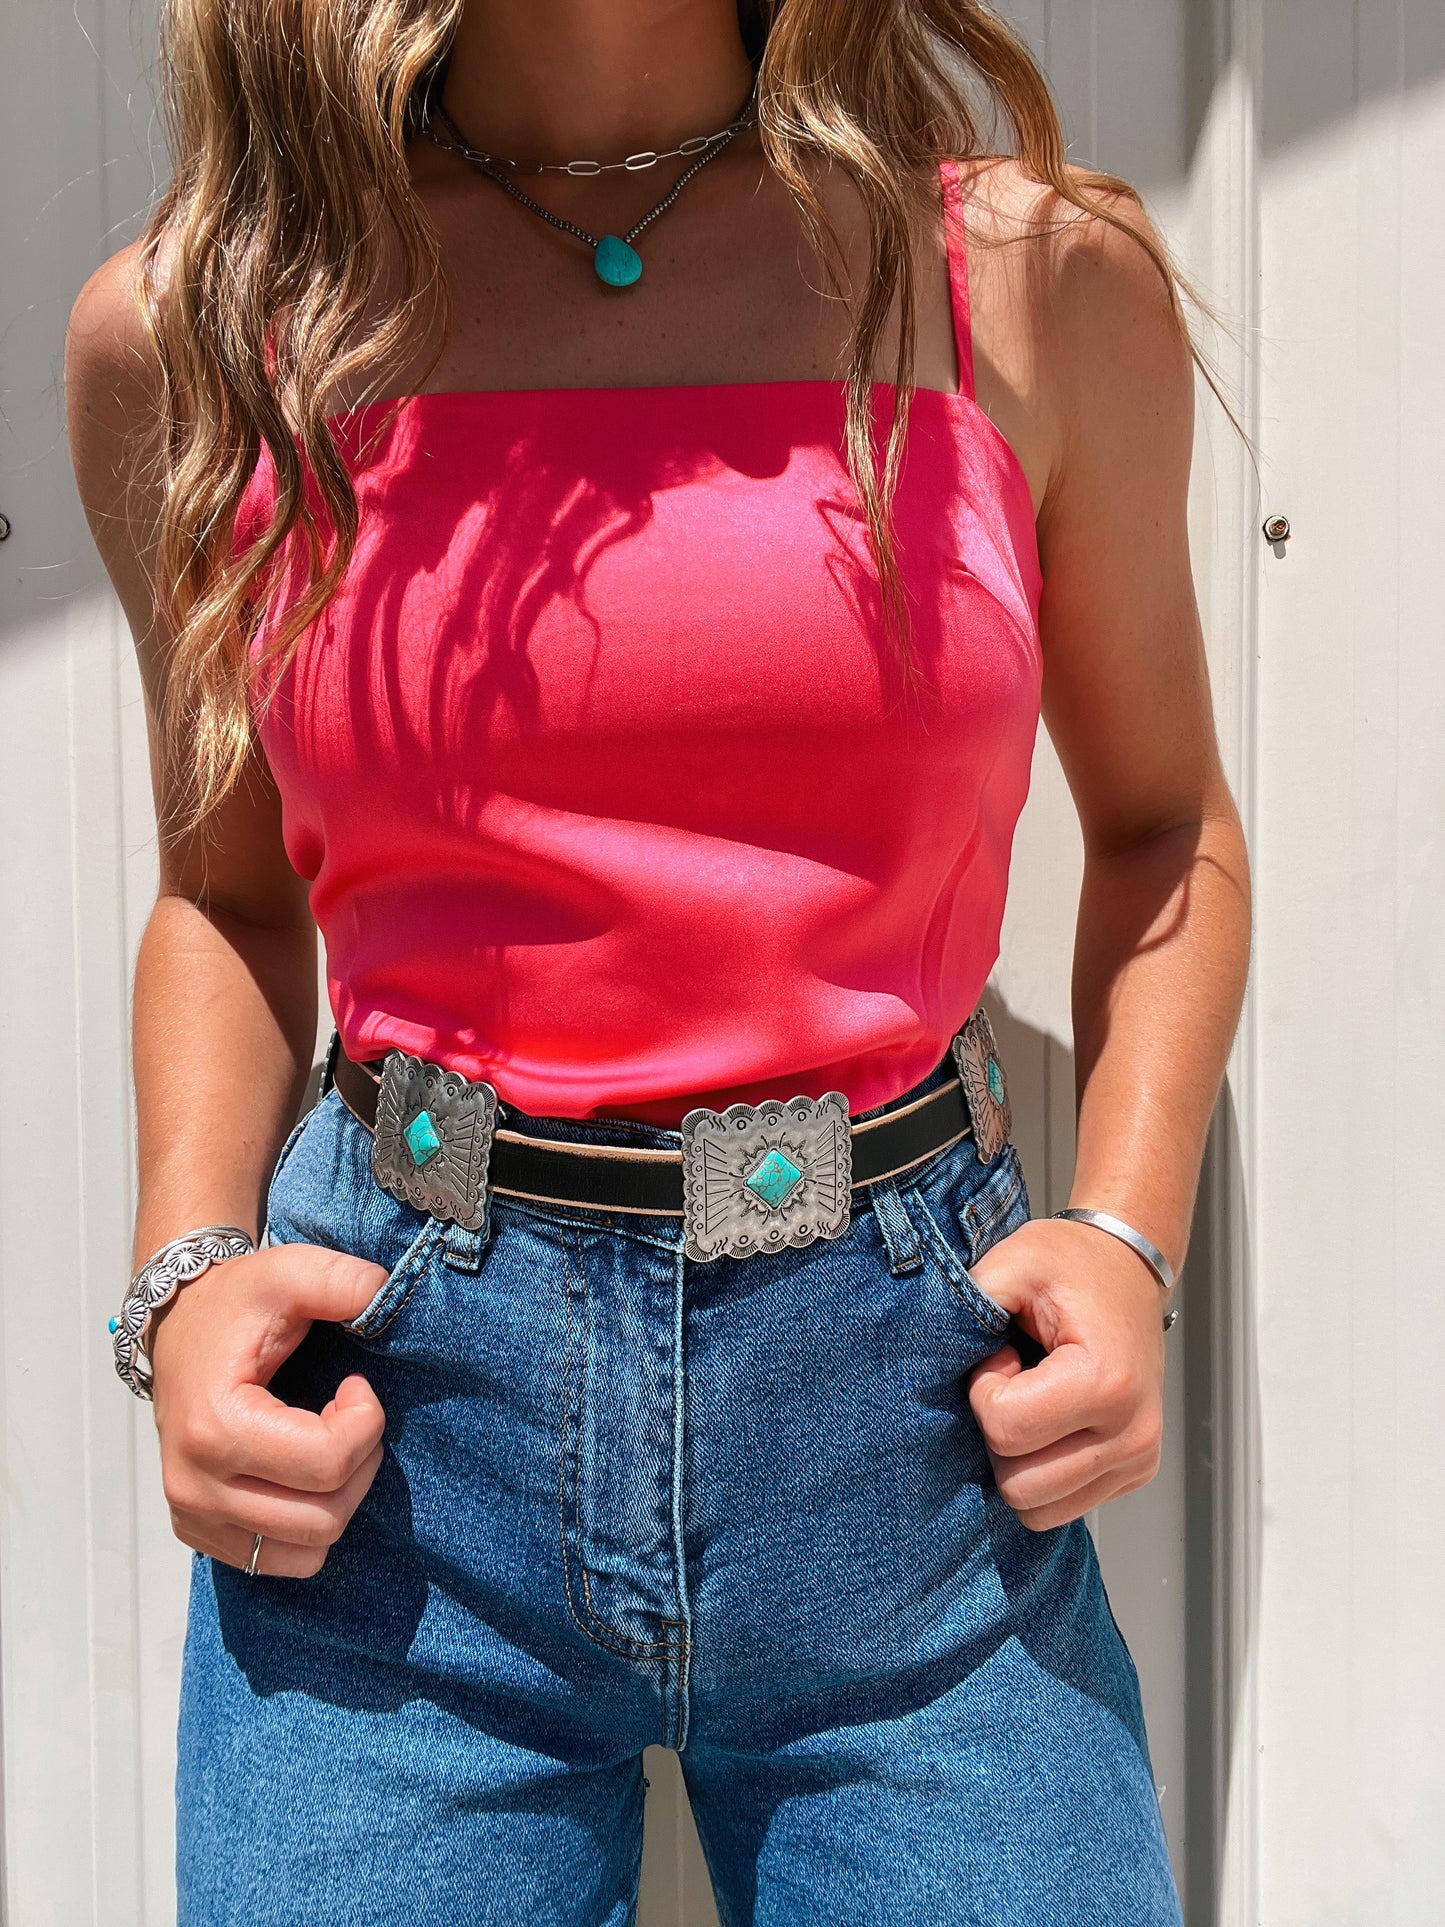 The Turquoise Buckle Belt